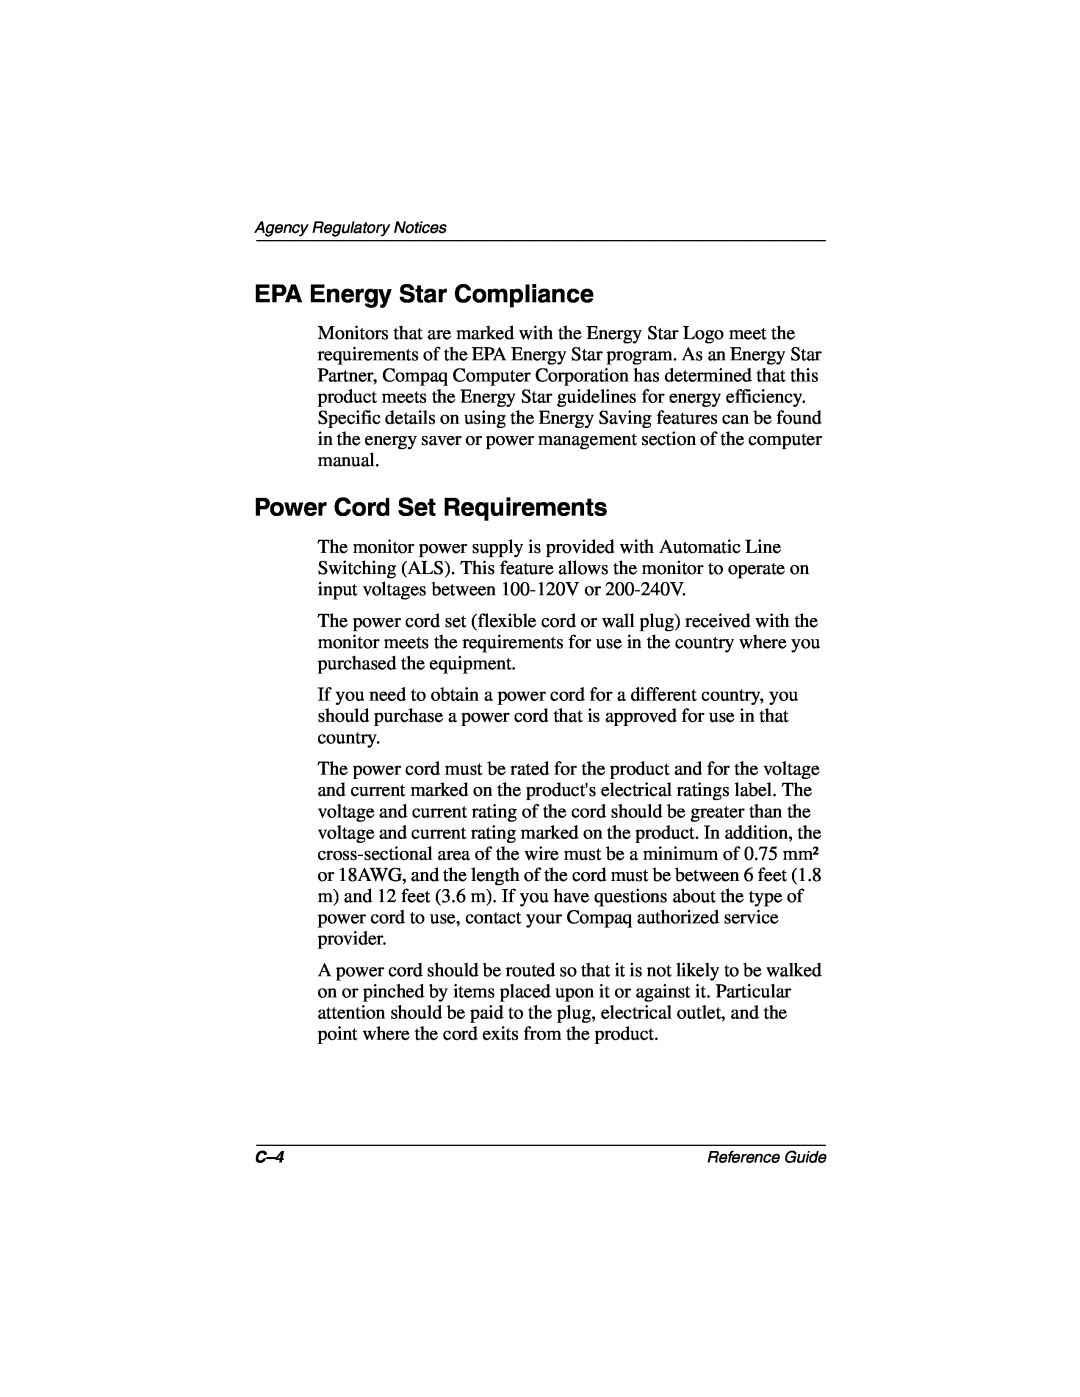 Compaq 5017 manual EPA Energy Star Compliance, Power Cord Set Requirements 